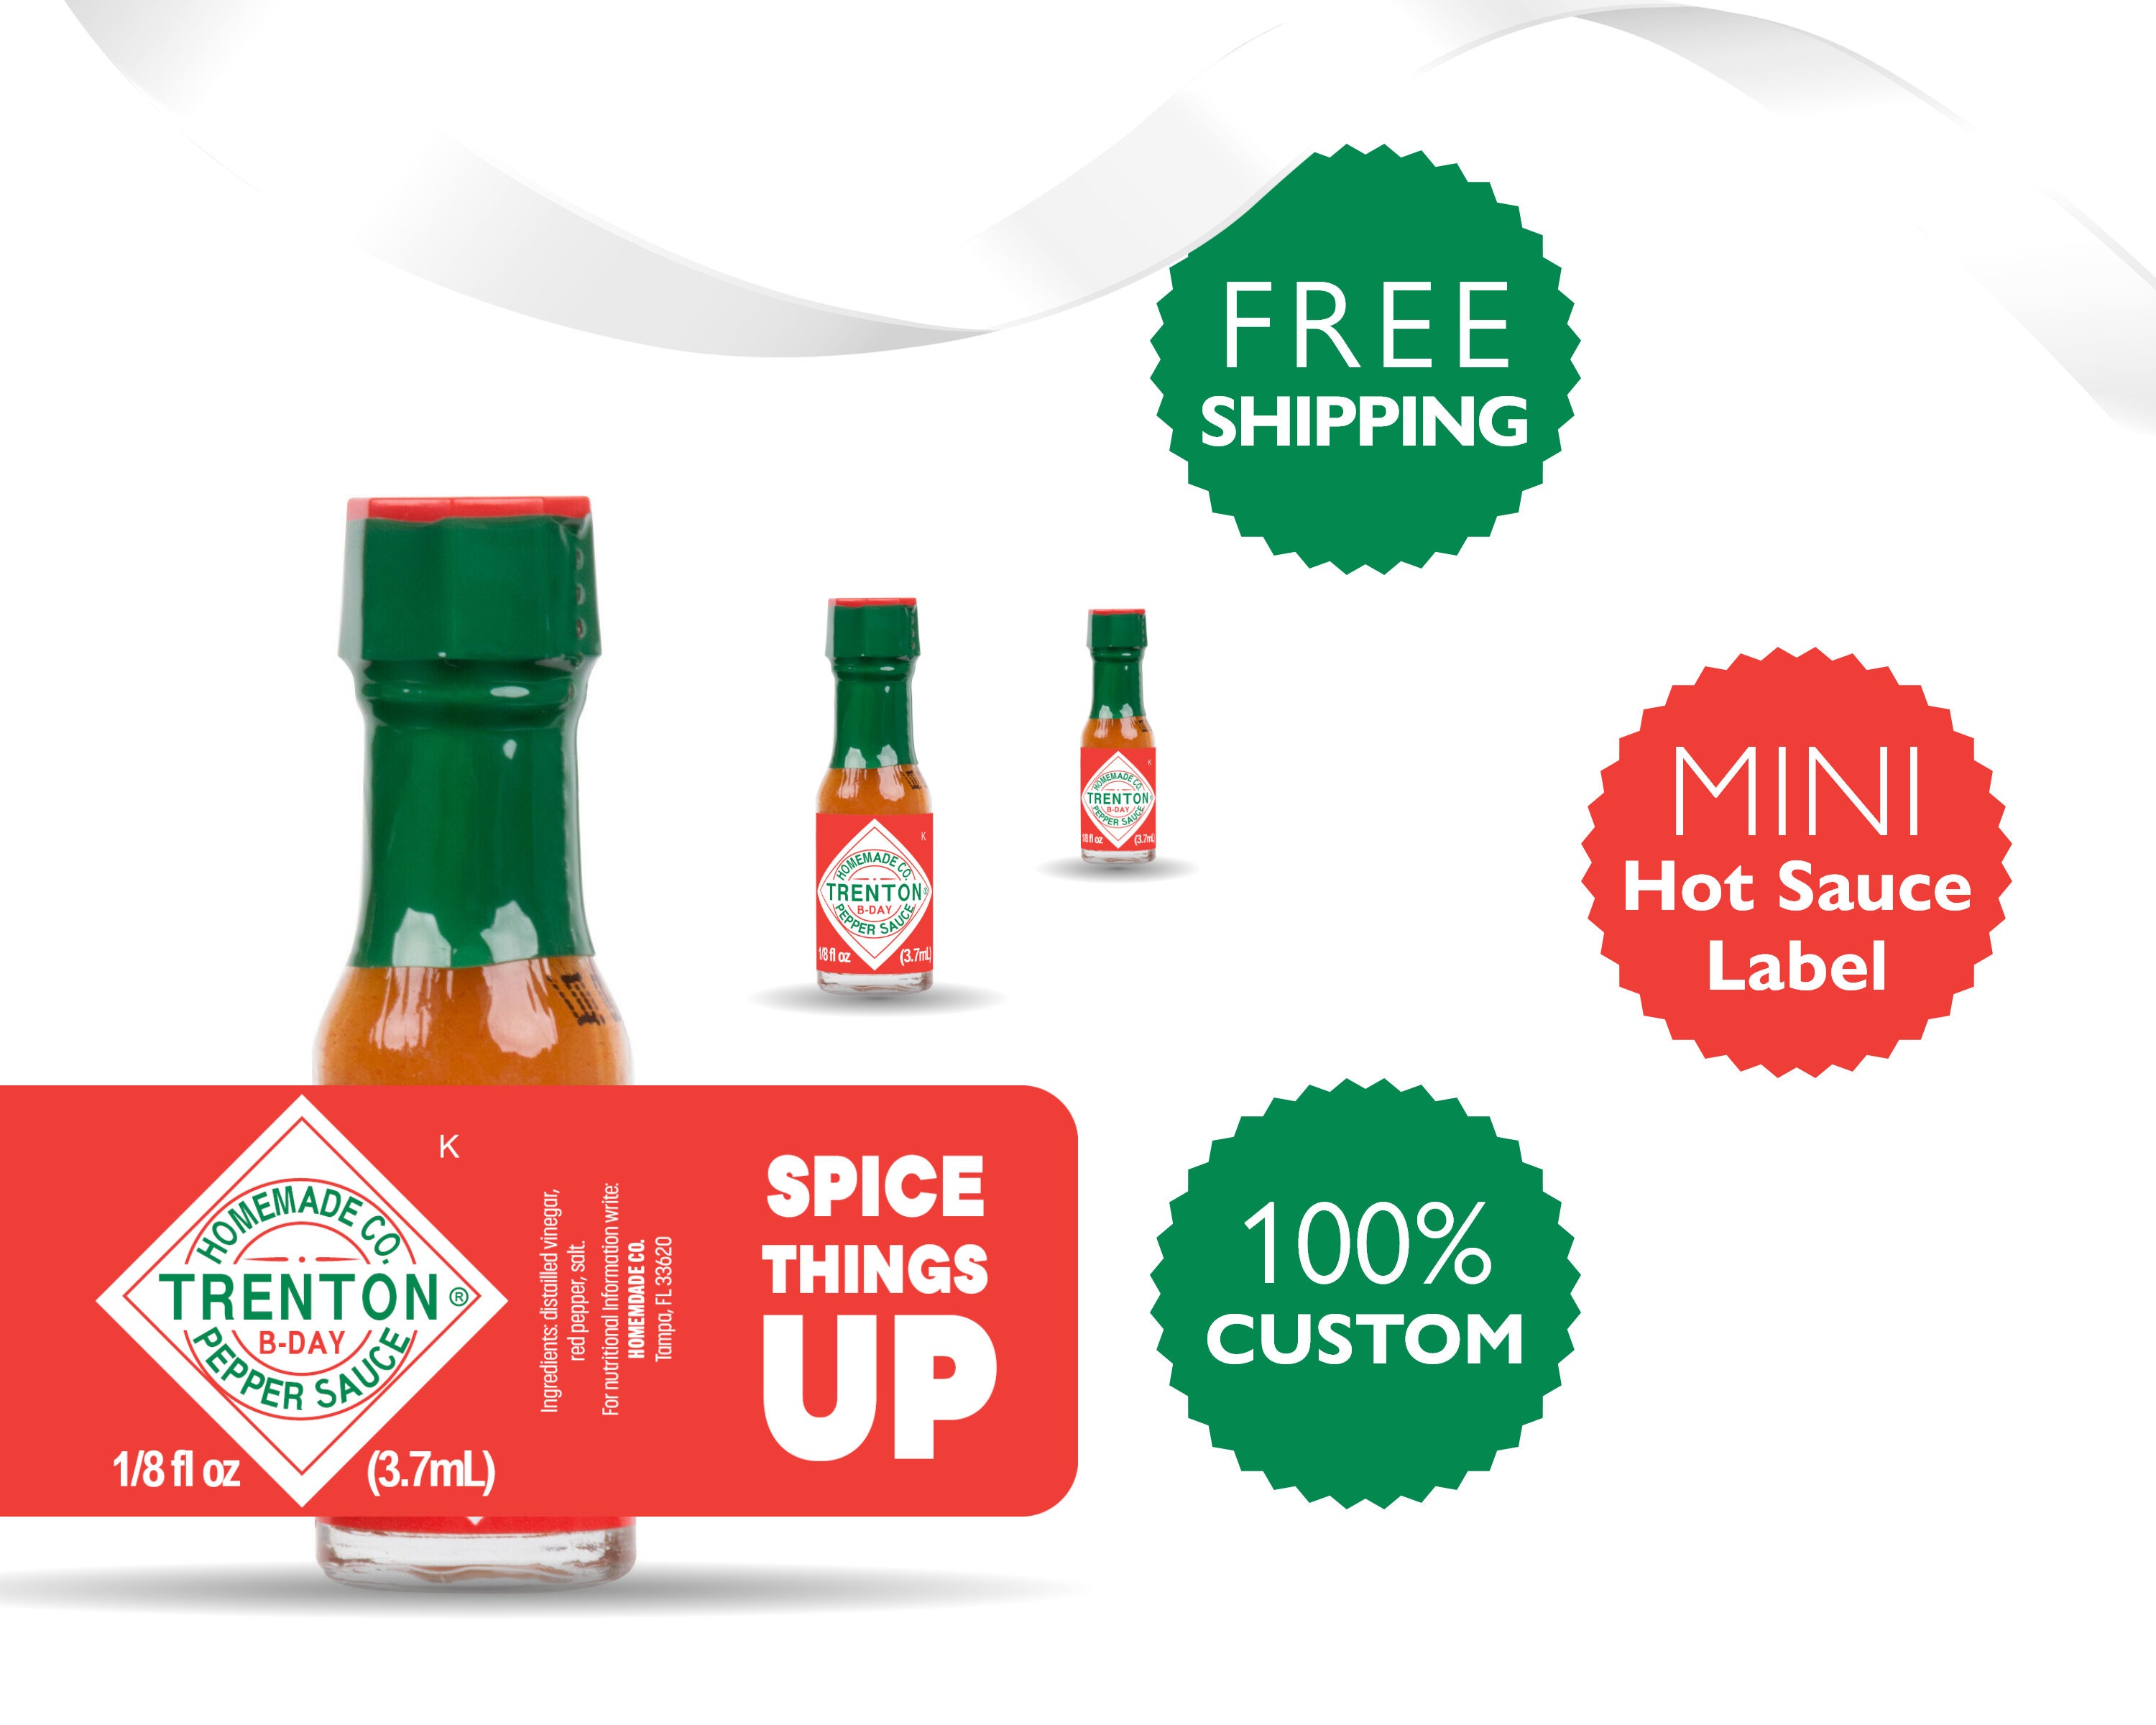 Mini Tabasco Hot Sauce Keychain - Includes 3 Mini Hot Sauce Bottles (.35oz)  With Travel Hot Sauce Key Chain With Refillable Funnel - Red Tabasco Hot